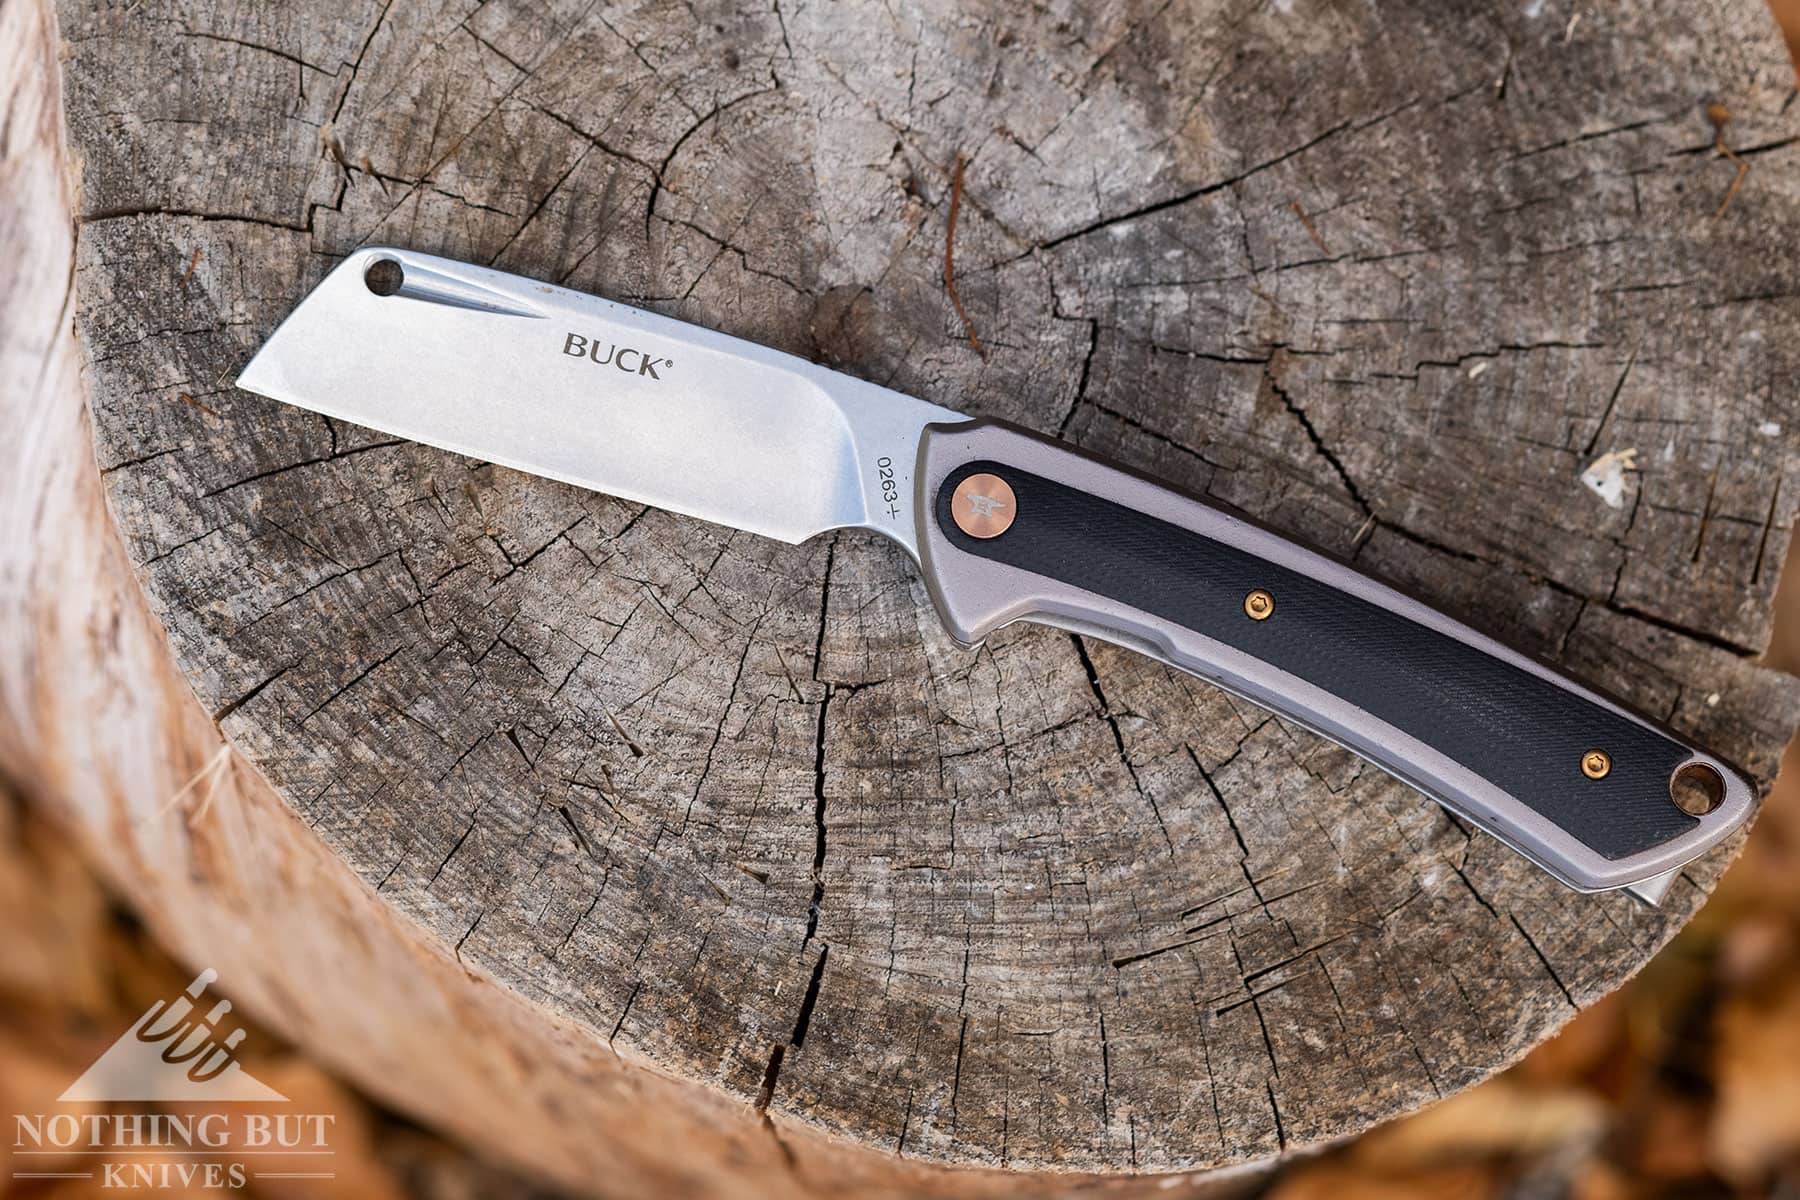 The Buck HiLine folding knife in the open position on a tree stump.